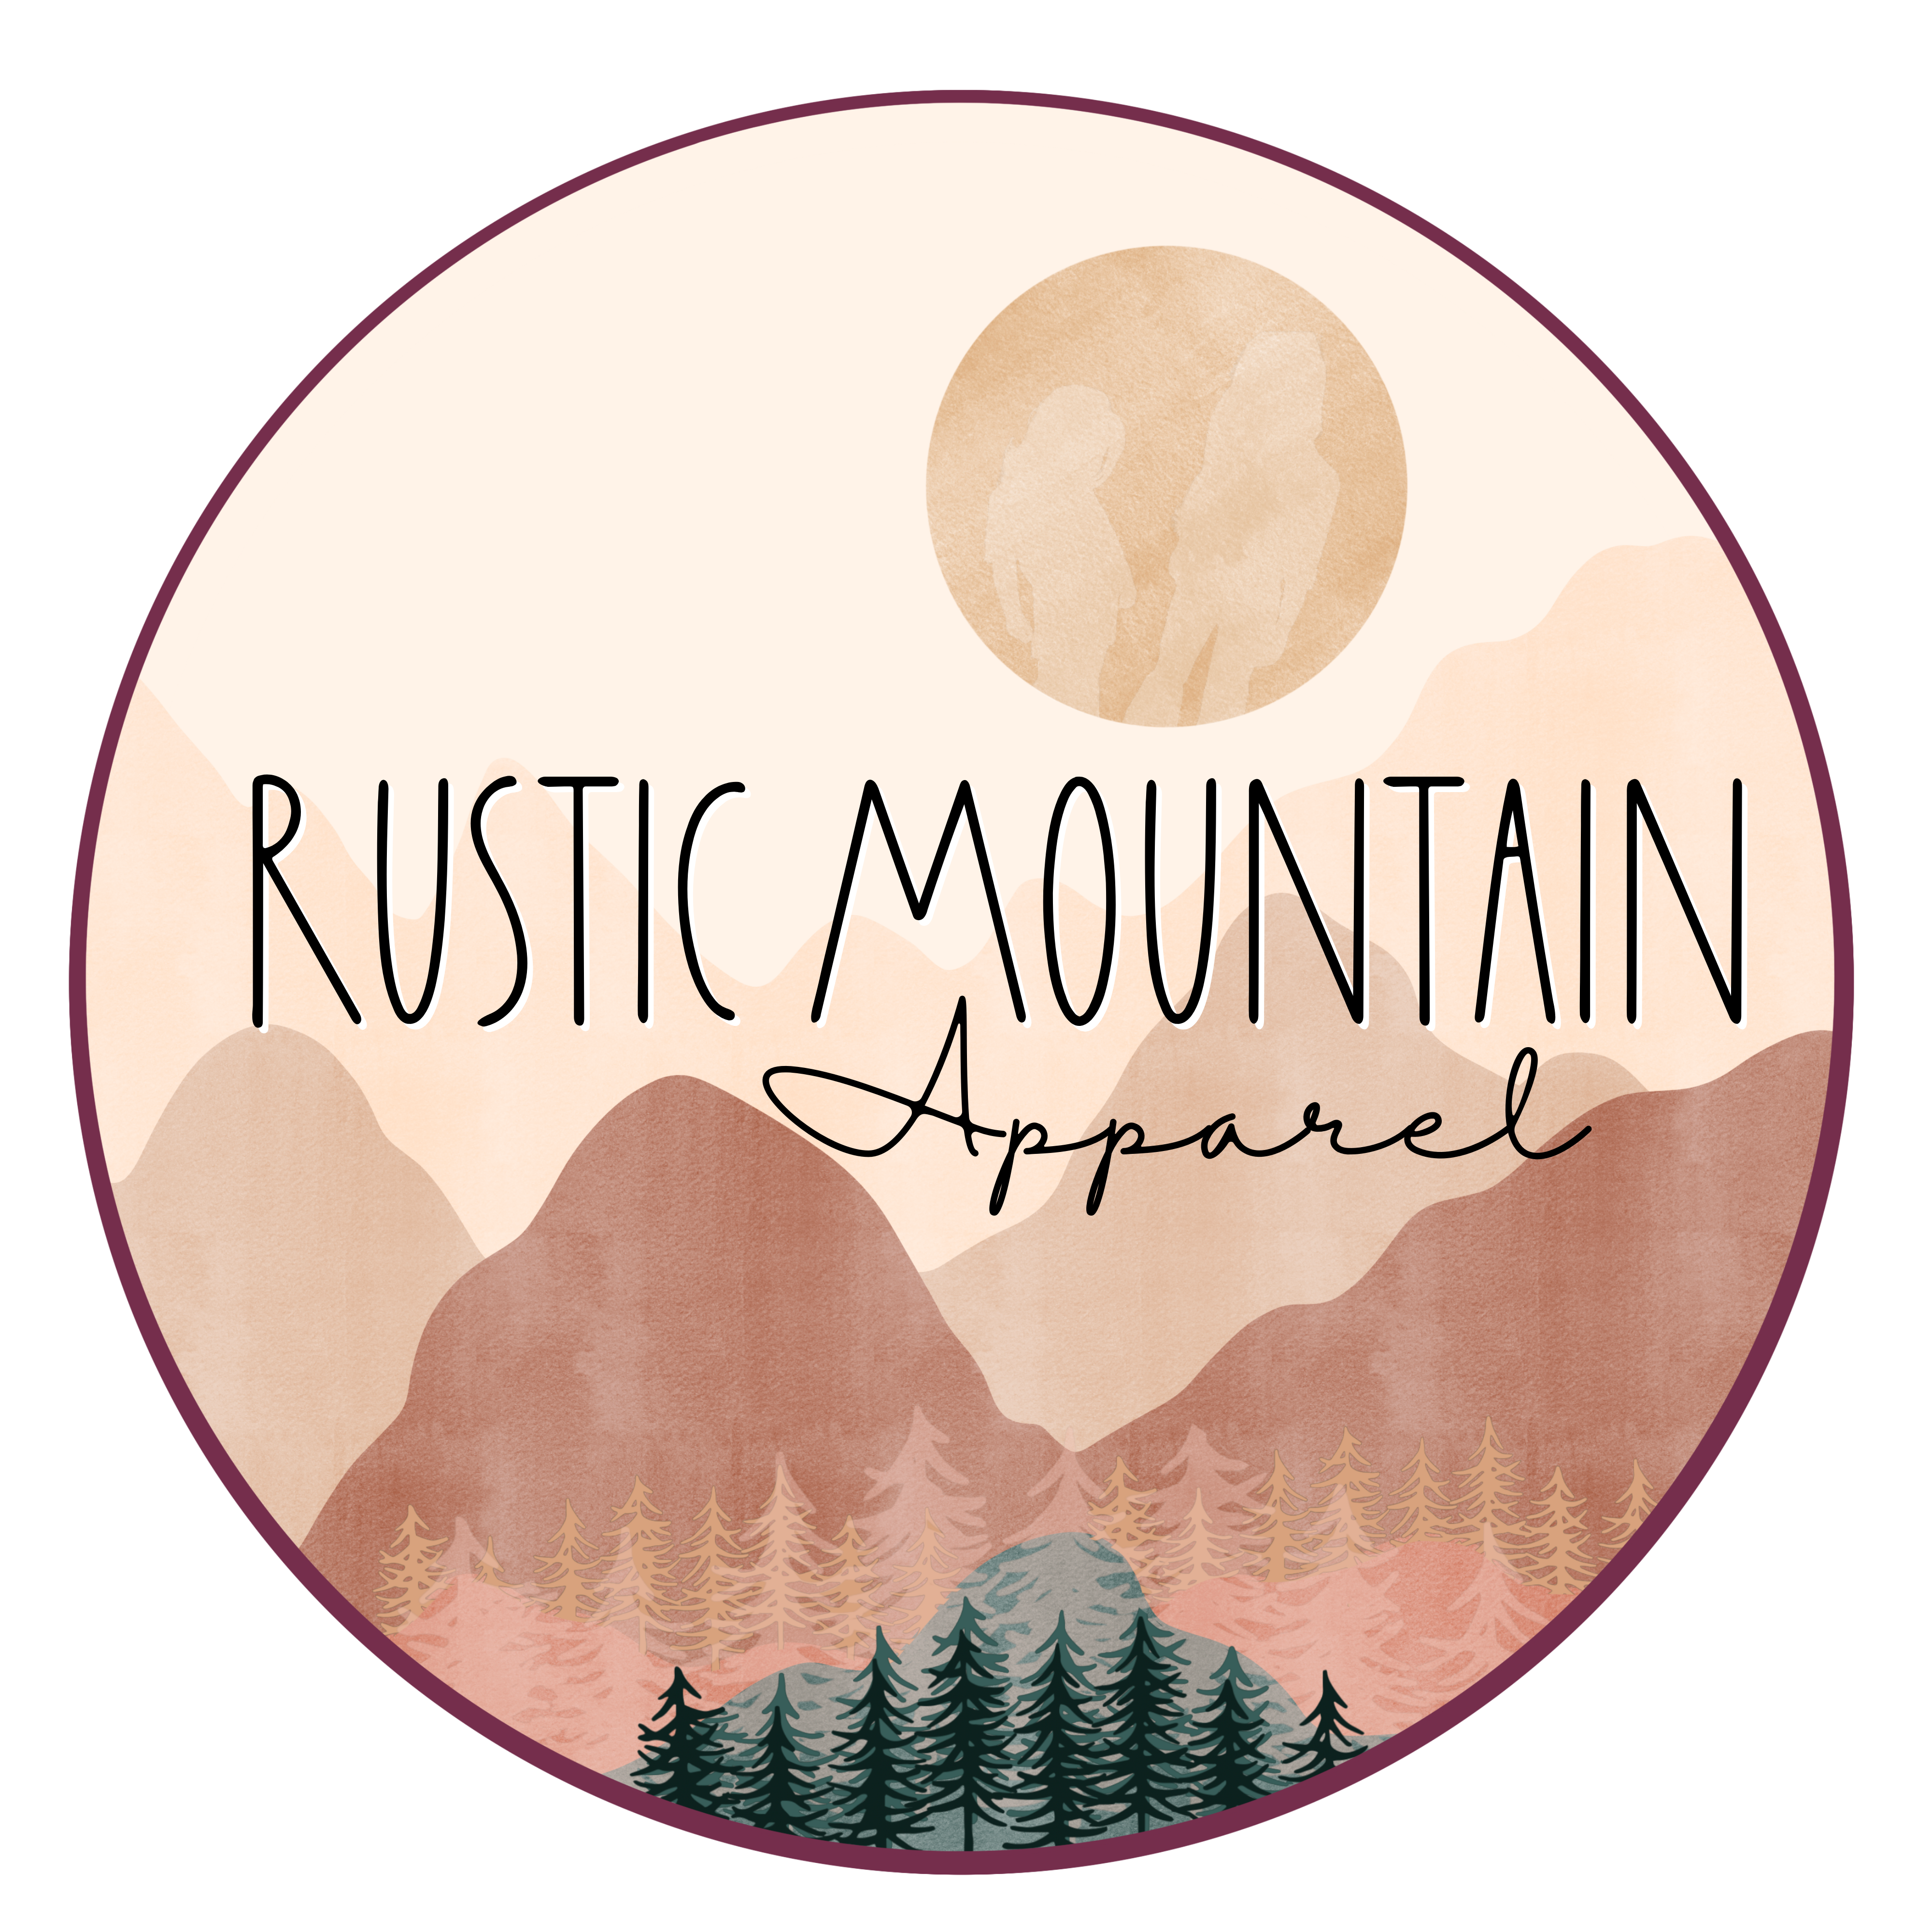 Rustic Mountain Clothing